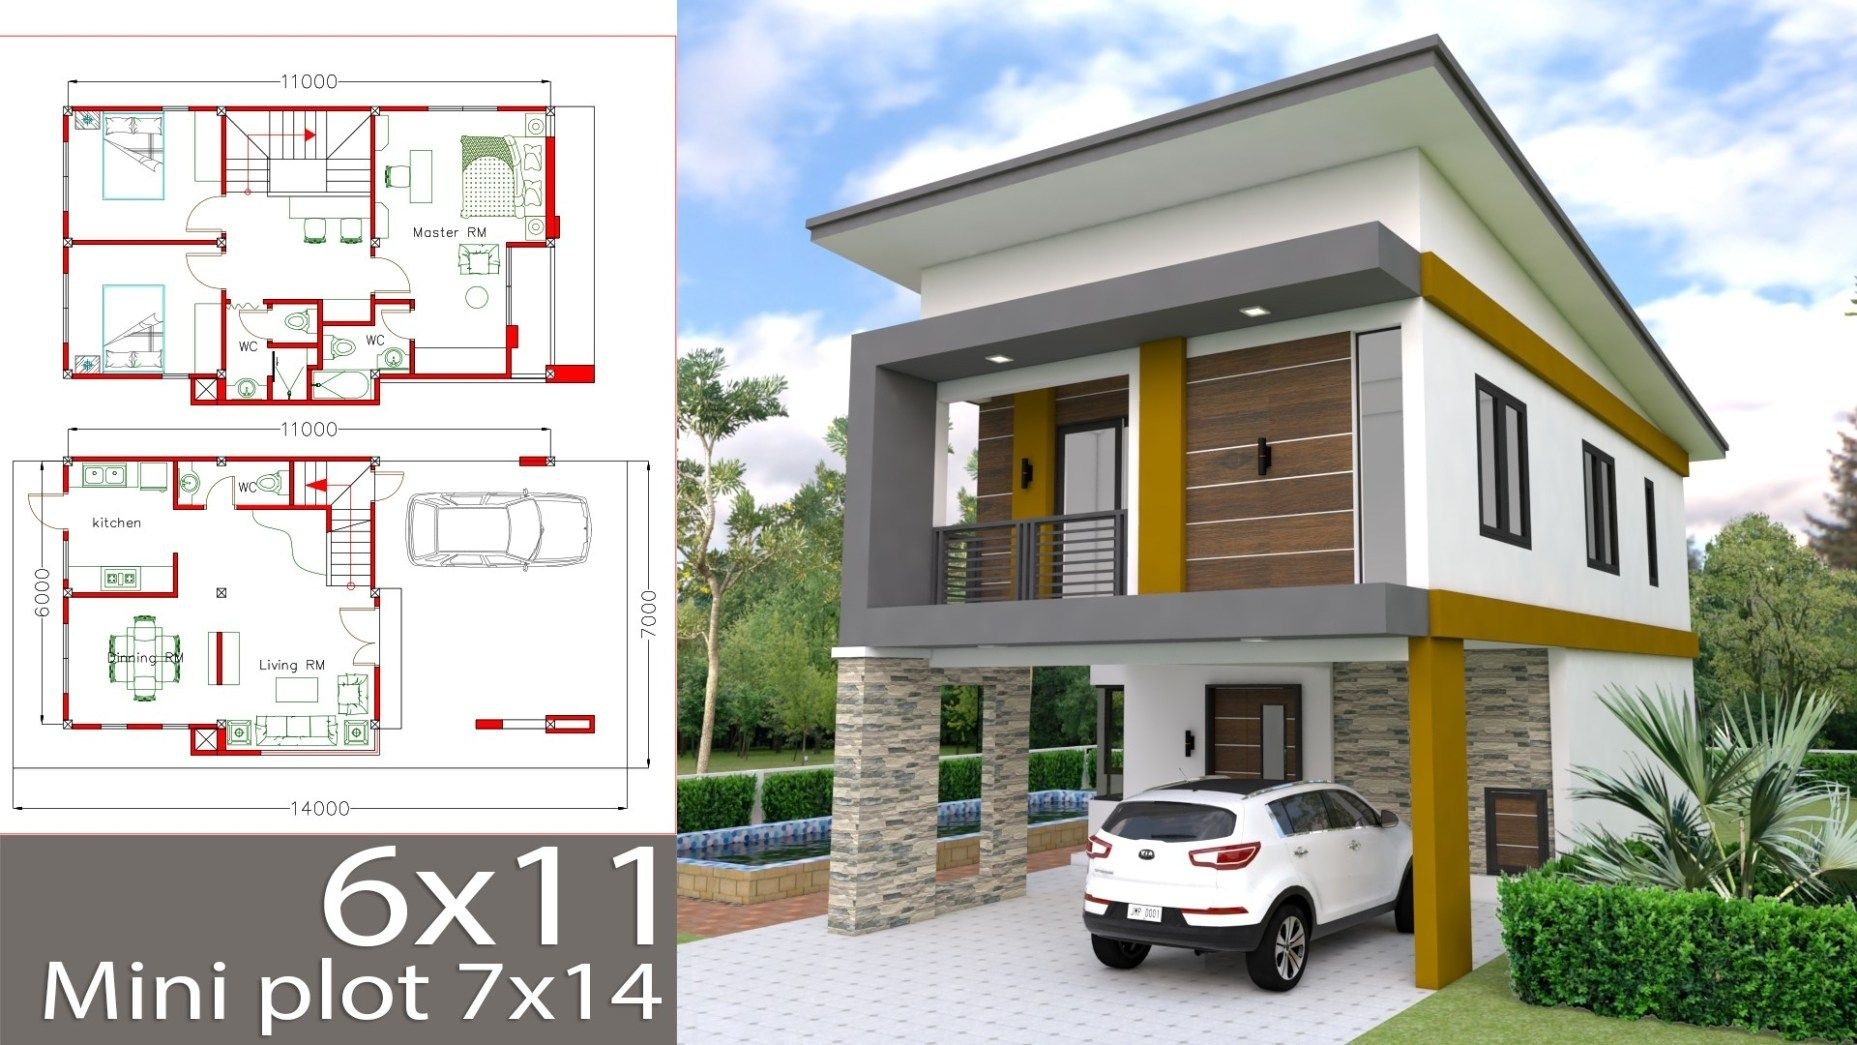 Gorgeous house plans 6x11m with 3 bedrooms sam house plans | two story house in marvelous simple house designs 3 bedrooms